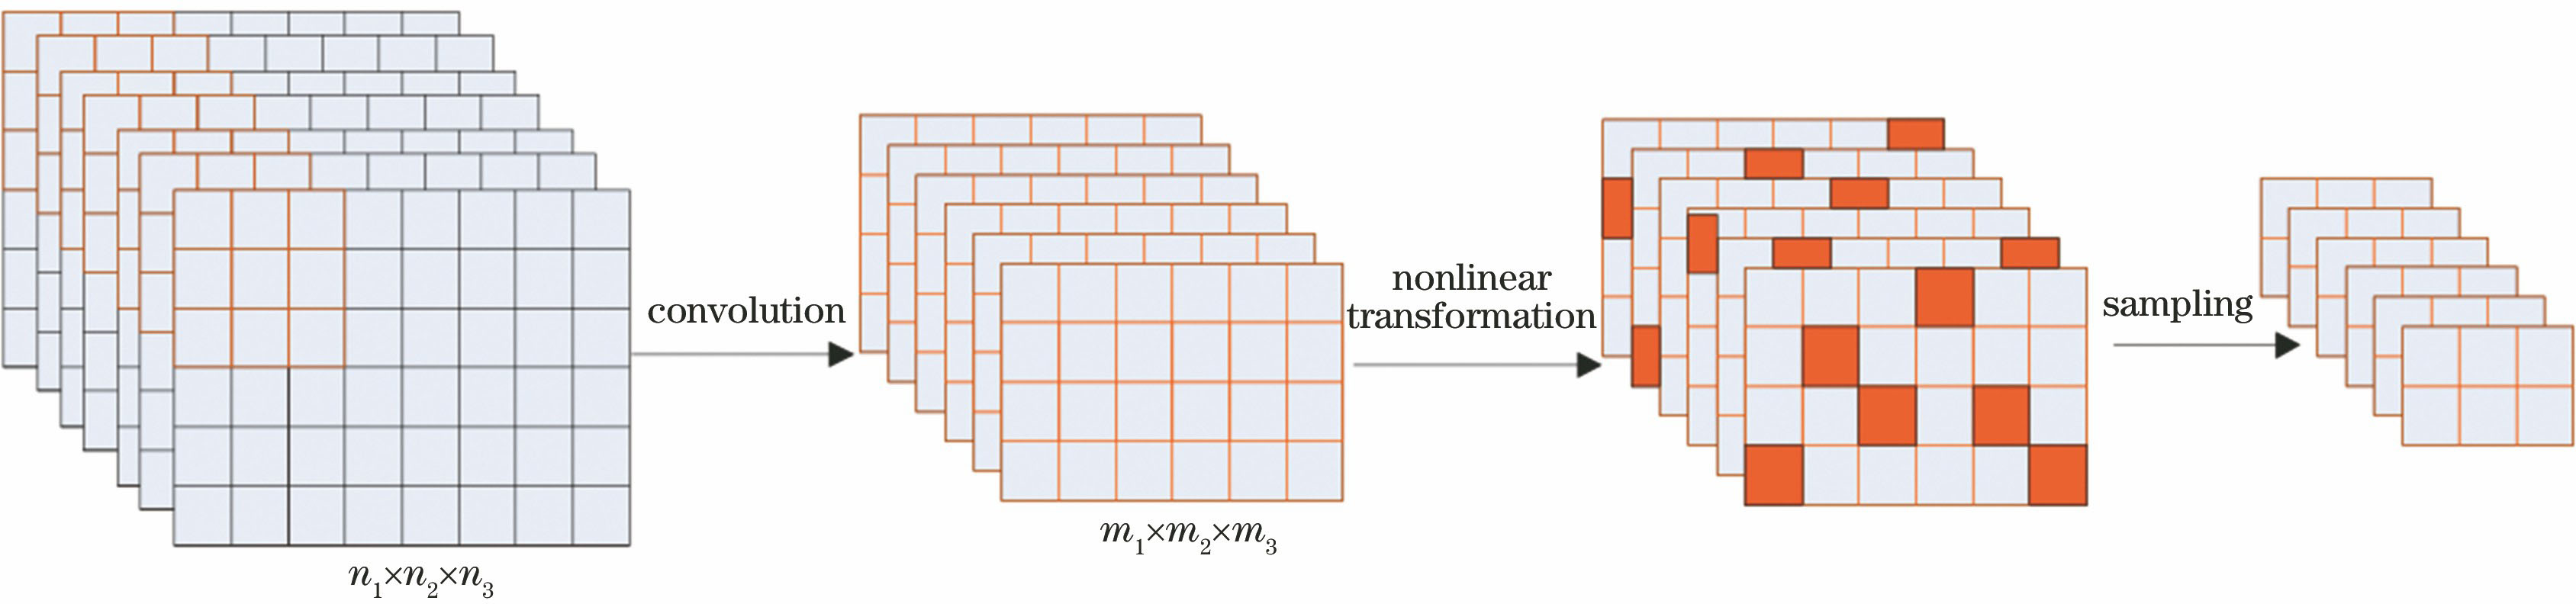 Three stages of single-layer convolution neural network